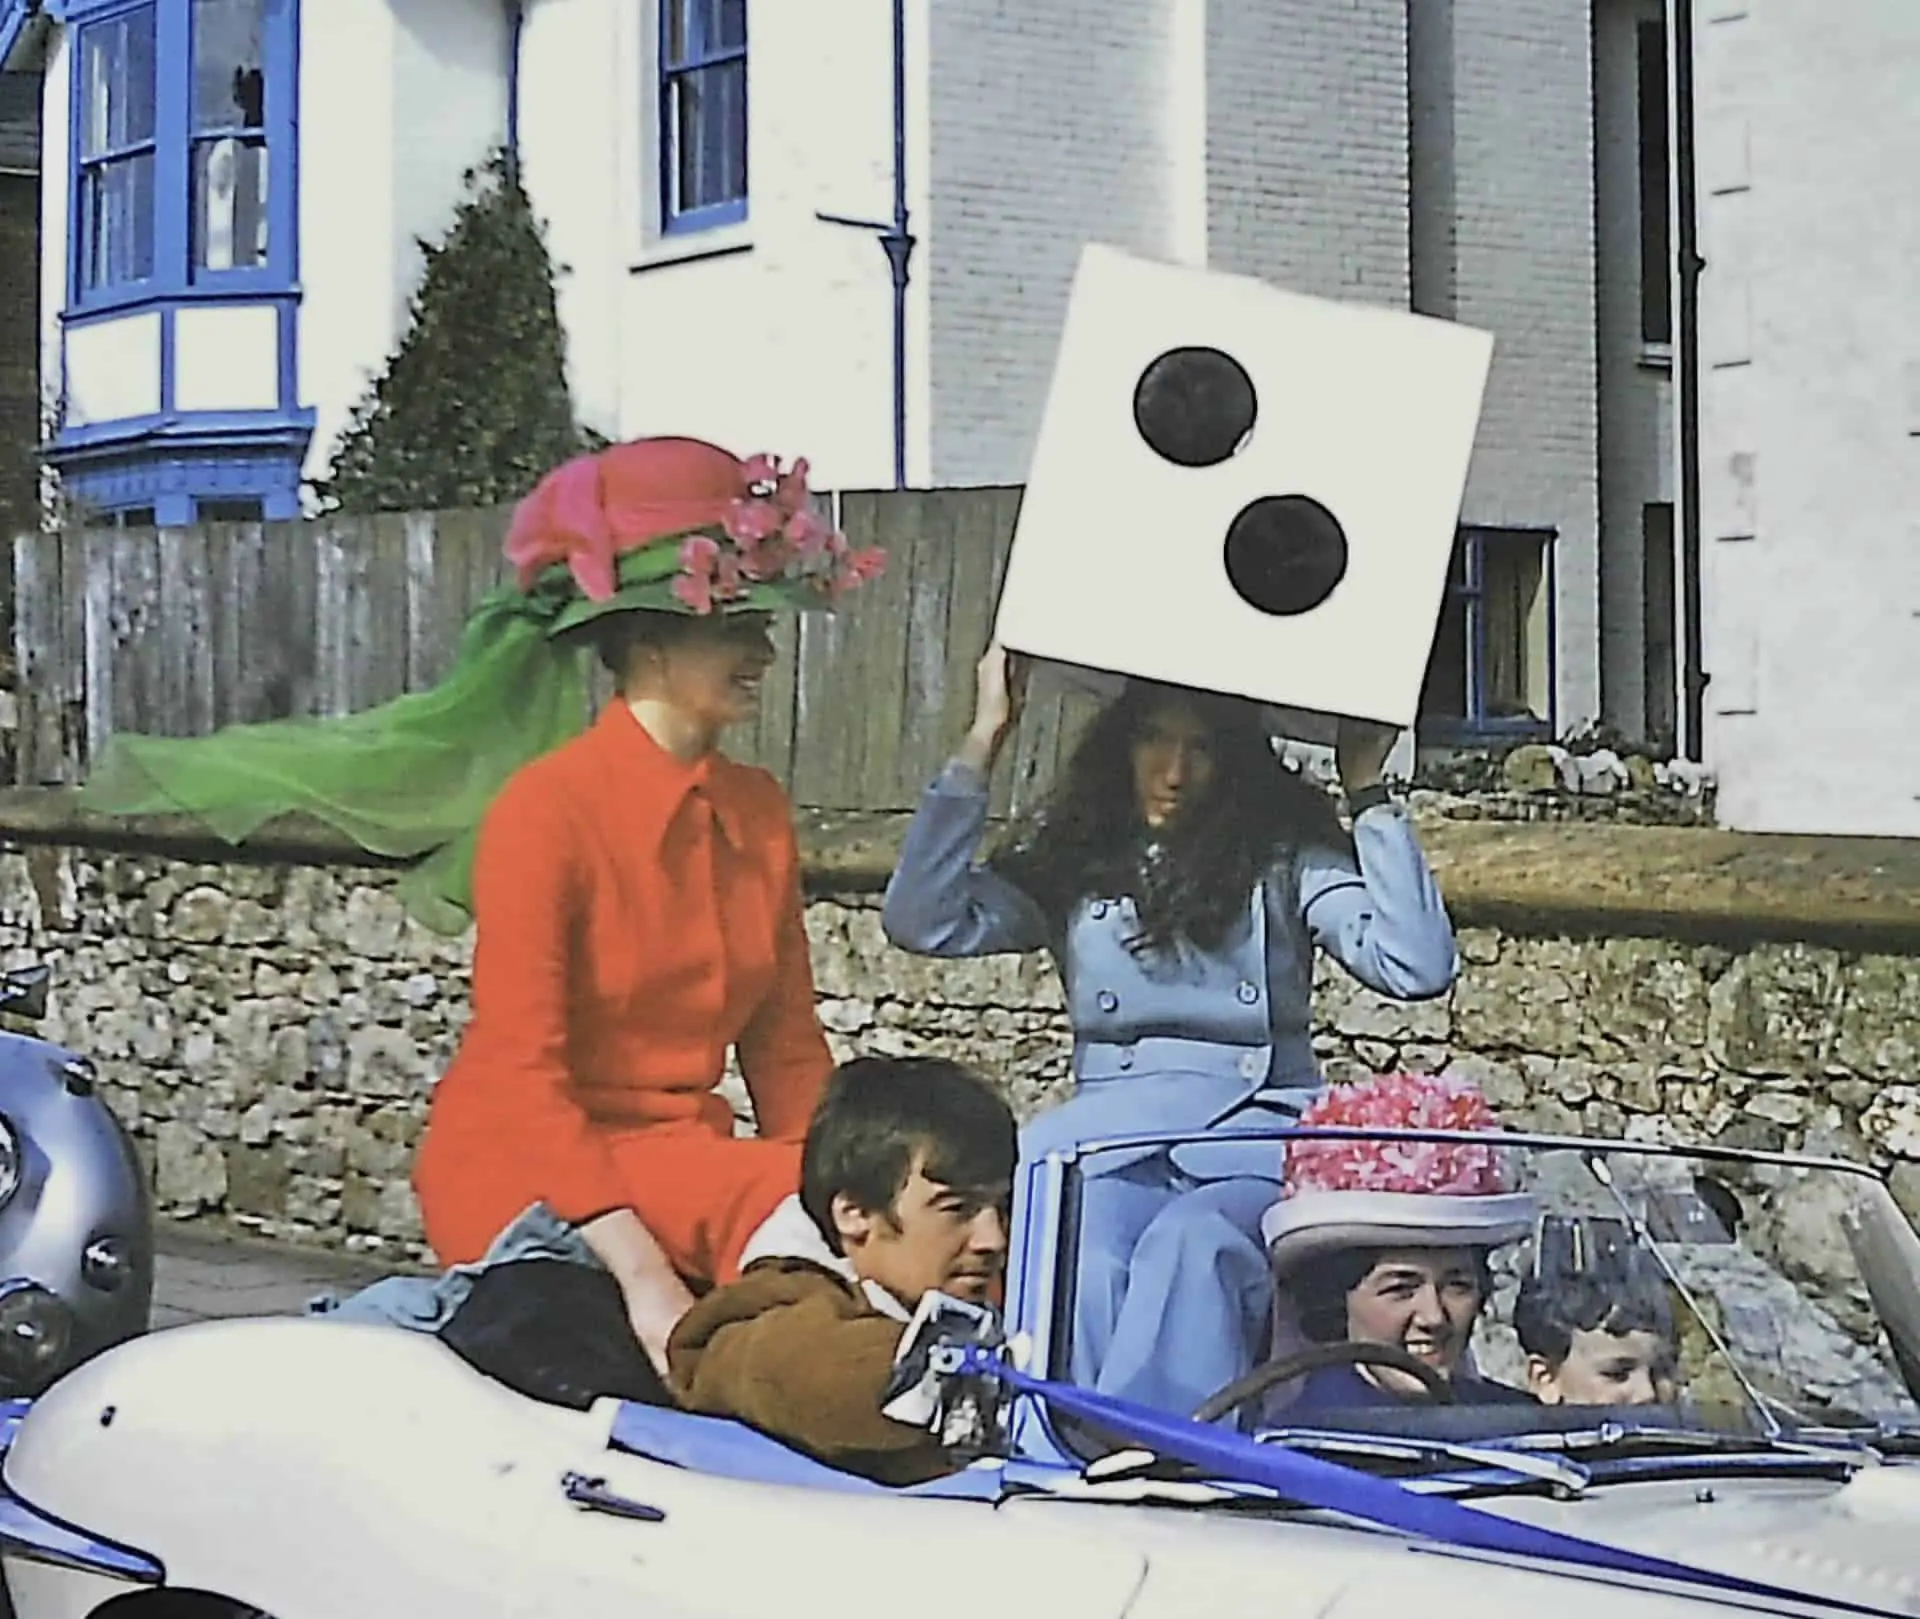 On the way to a Gertrude Shilling hat parade in Sandown, 1970s (2 photos). Courtesy of Sue Jackson